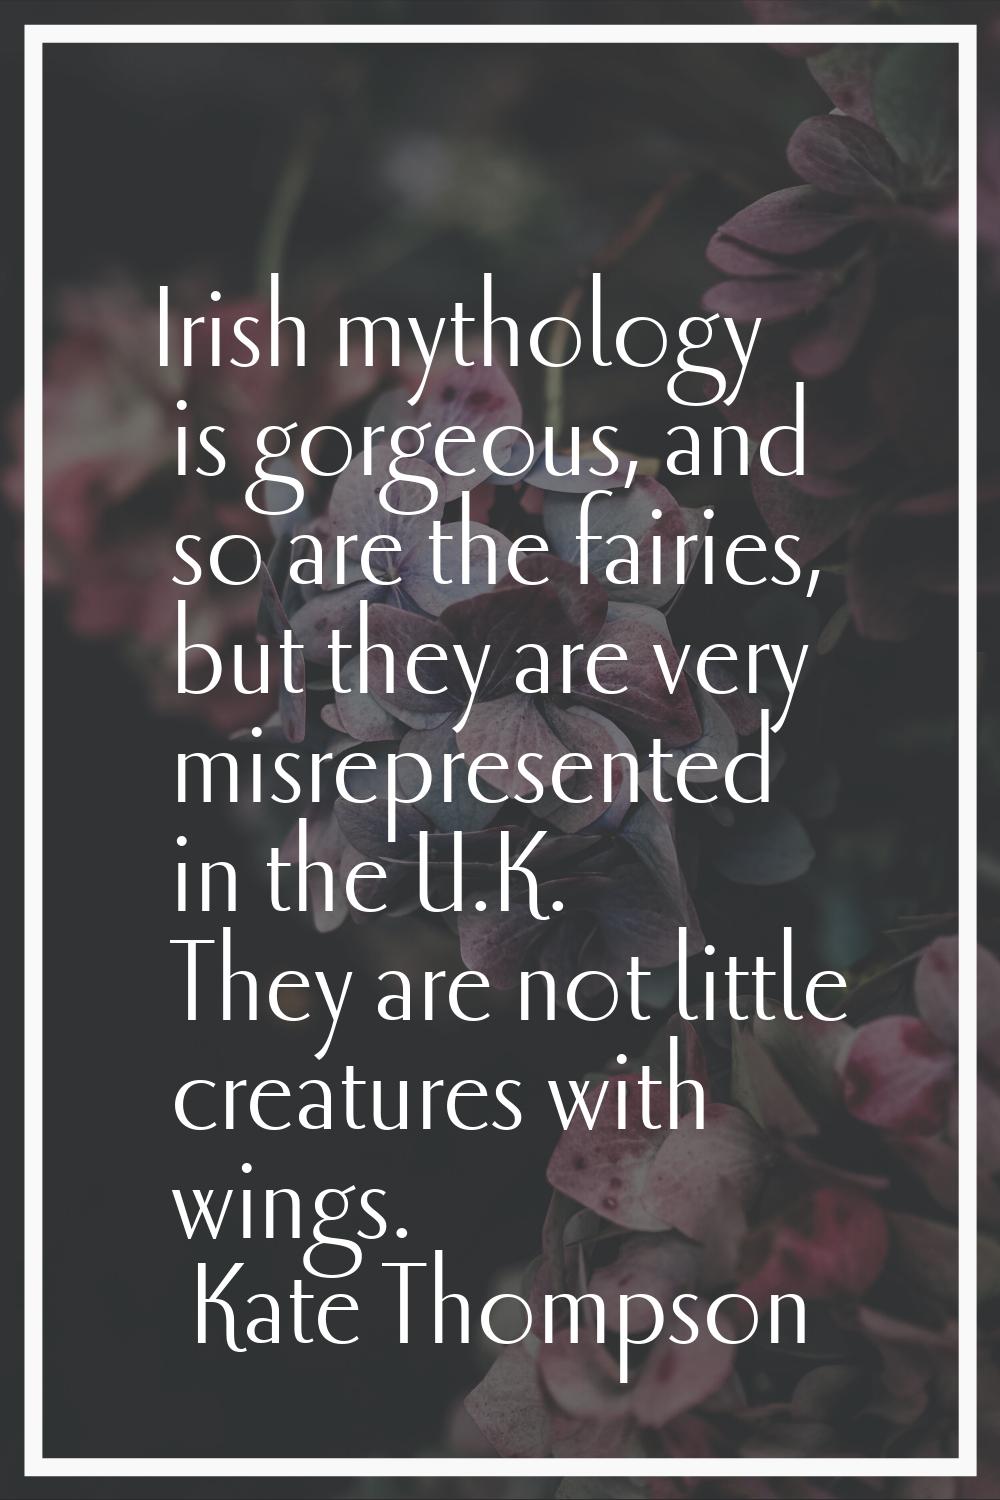 Irish mythology is gorgeous, and so are the fairies, but they are very misrepresented in the U.K. T